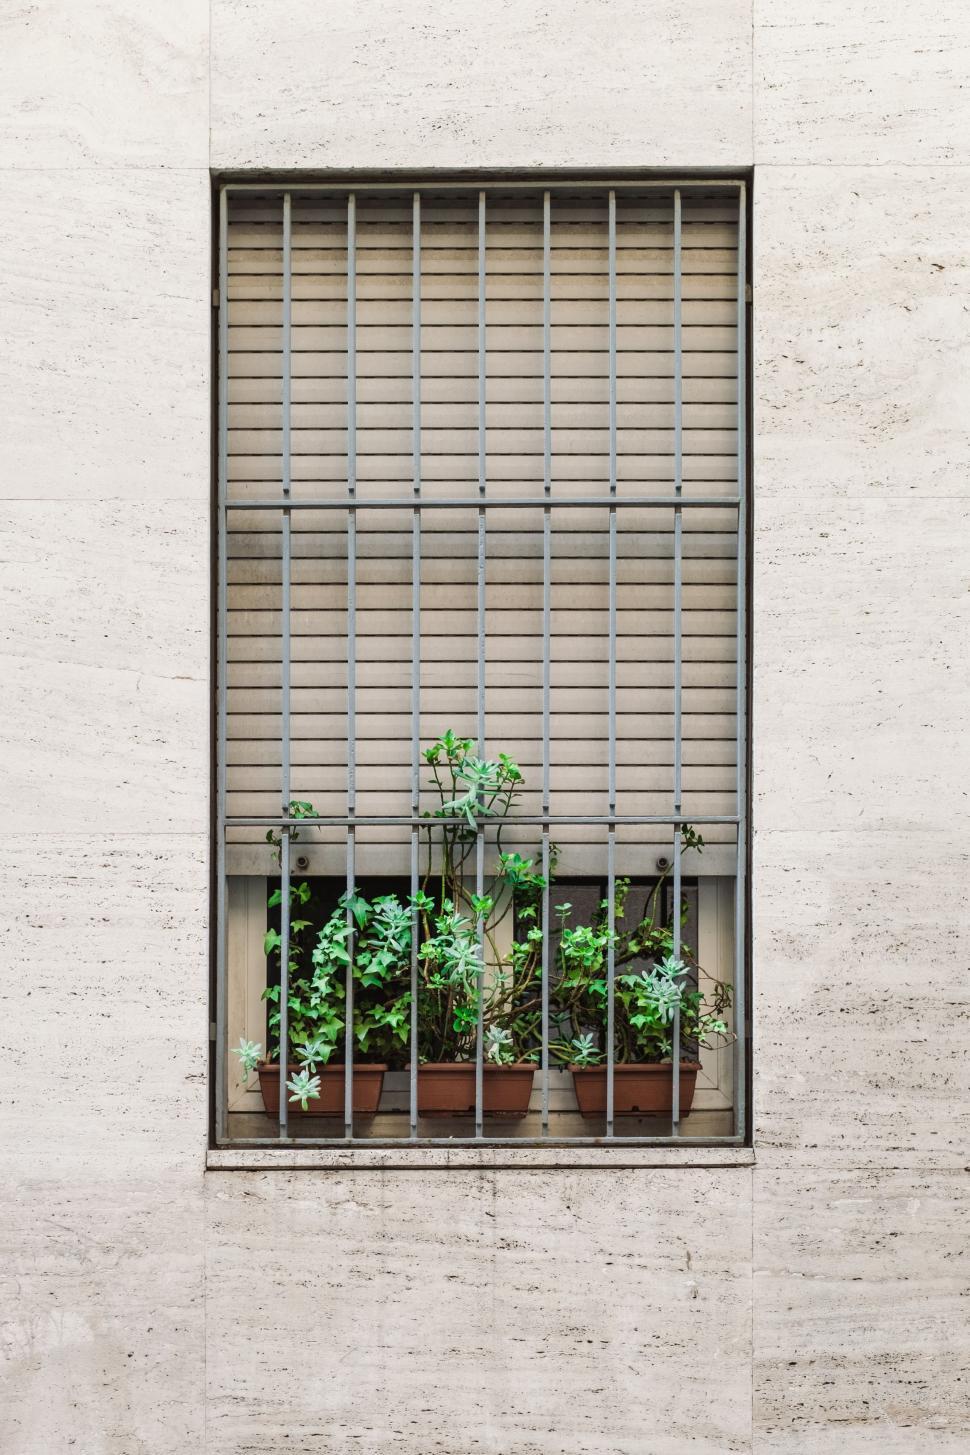 Free Image of Window Filled With Various Plants 